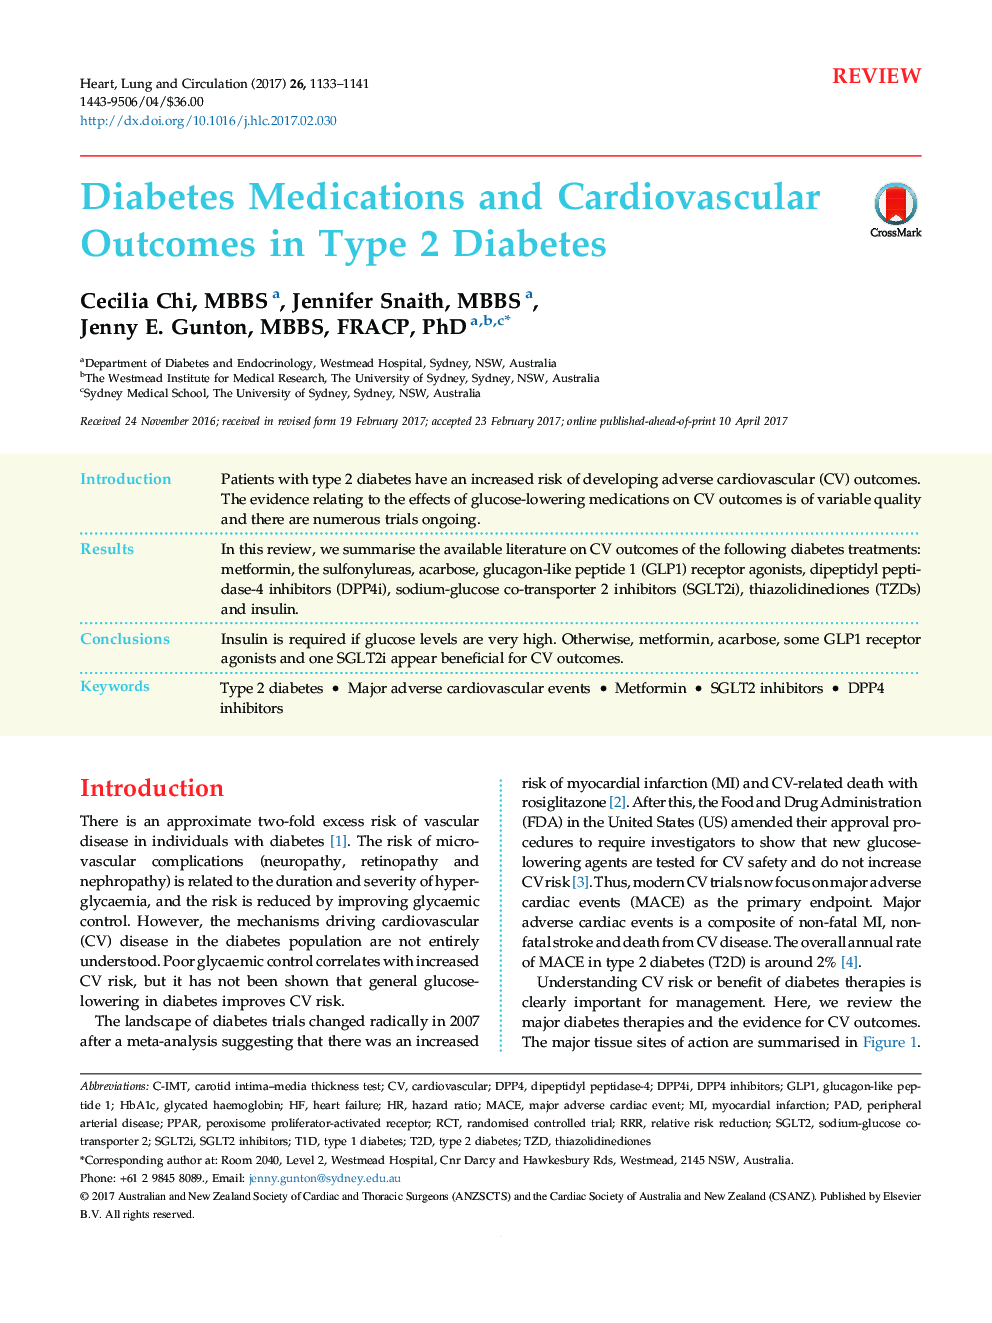 Diabetes Medications and Cardiovascular Outcomes in Type 2 Diabetes